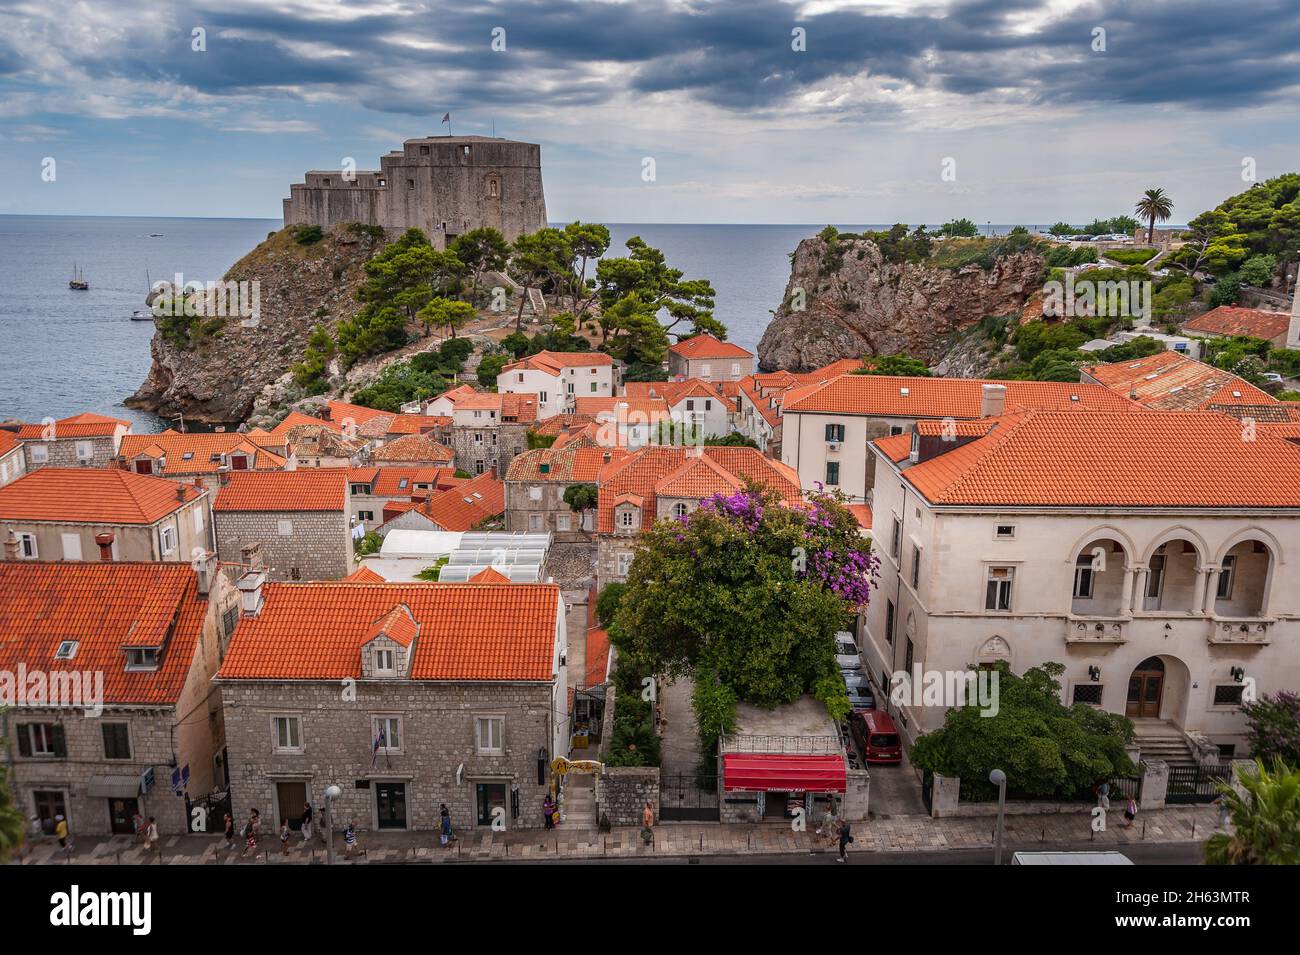 Dubrovnik castle and city overlook Stock Photo